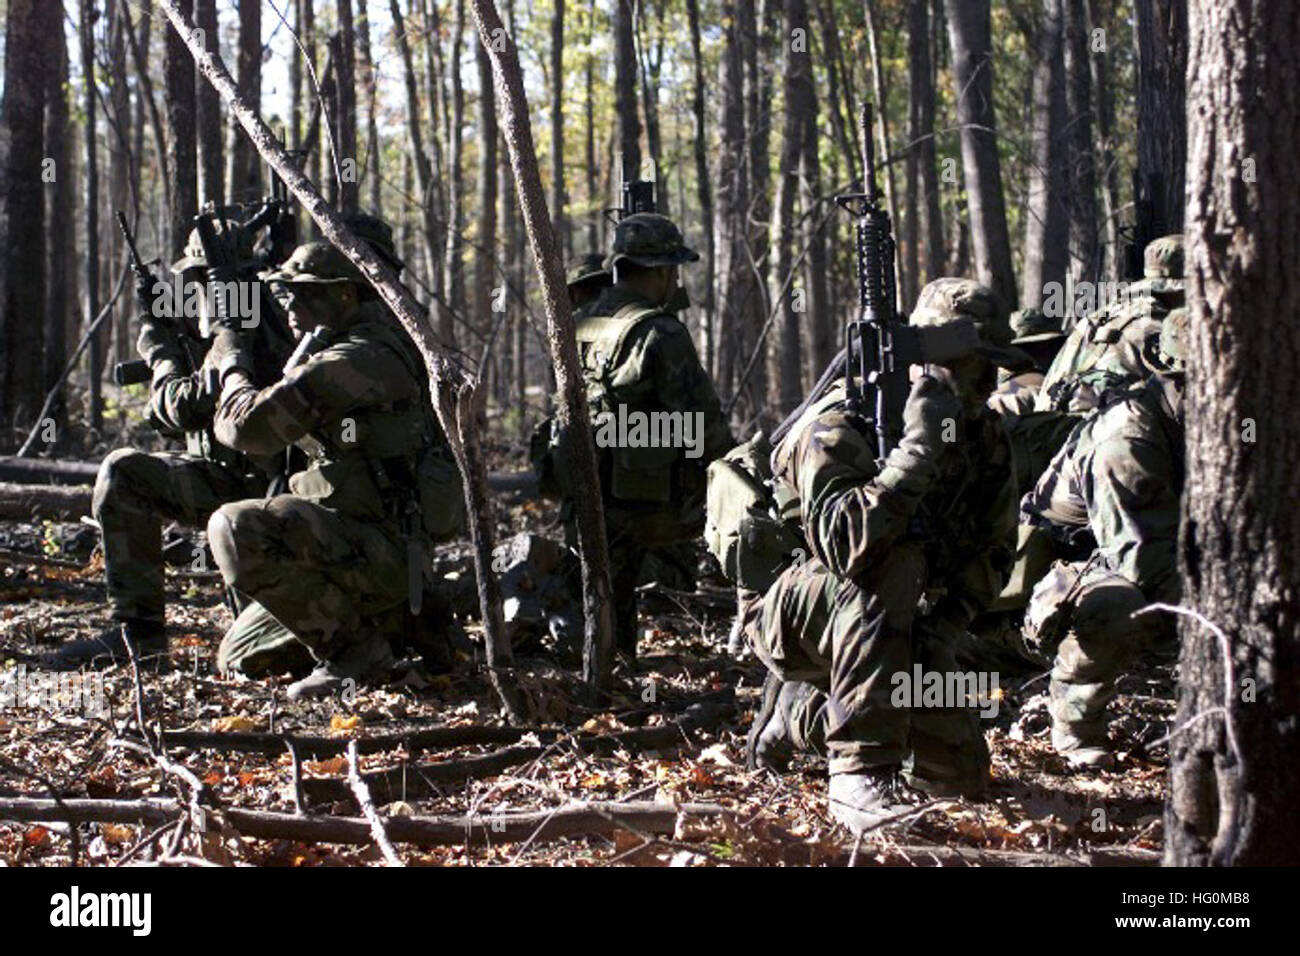 US Navy SEALs in woodlands operation Stock Photo